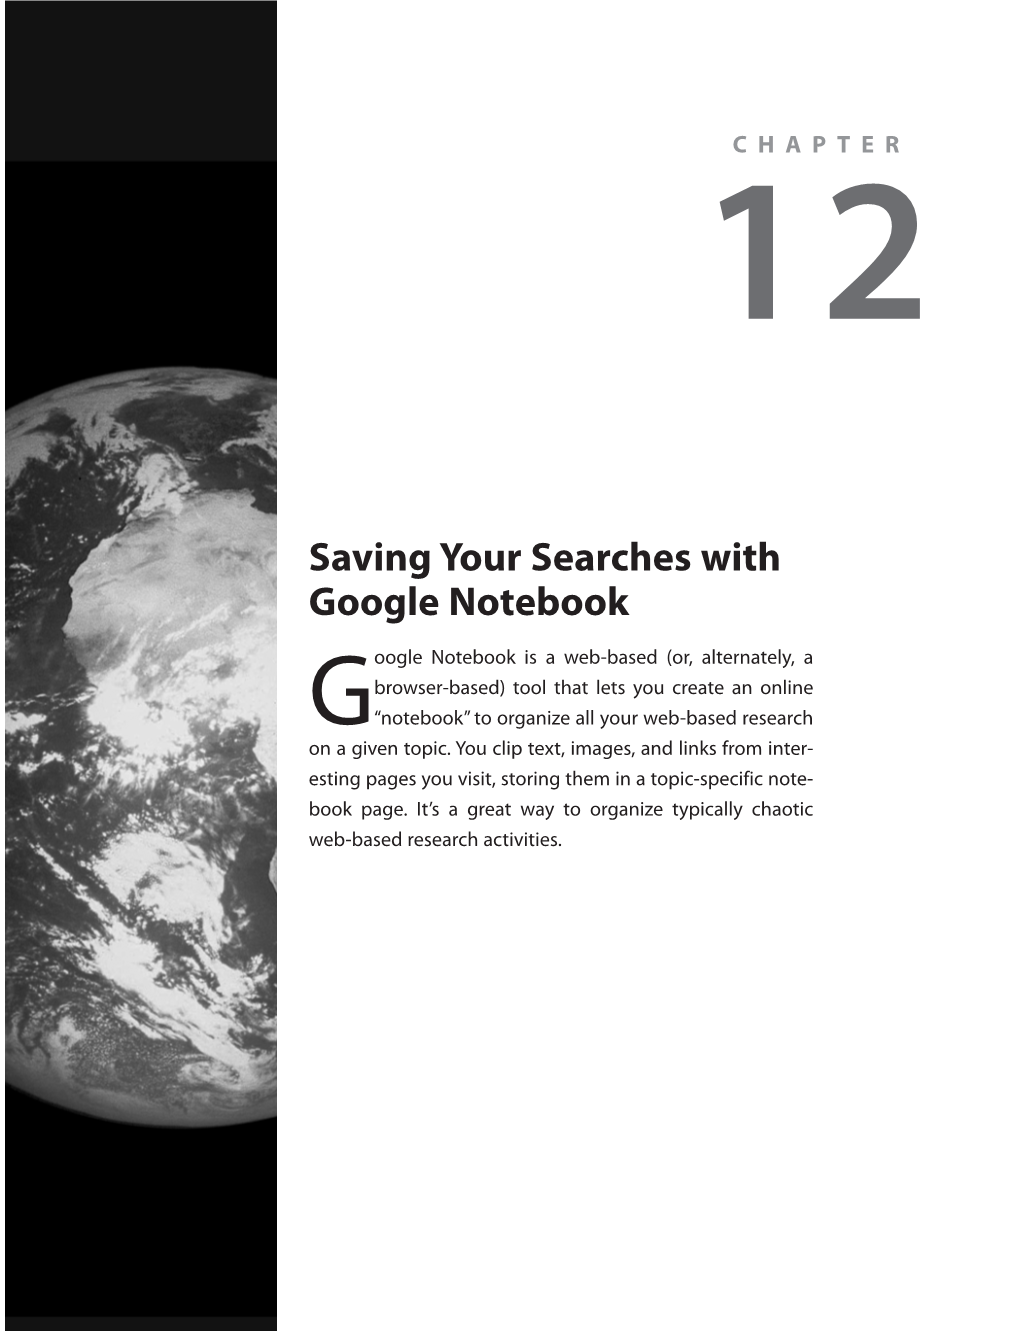 Saving Your Searches with Google Notebook